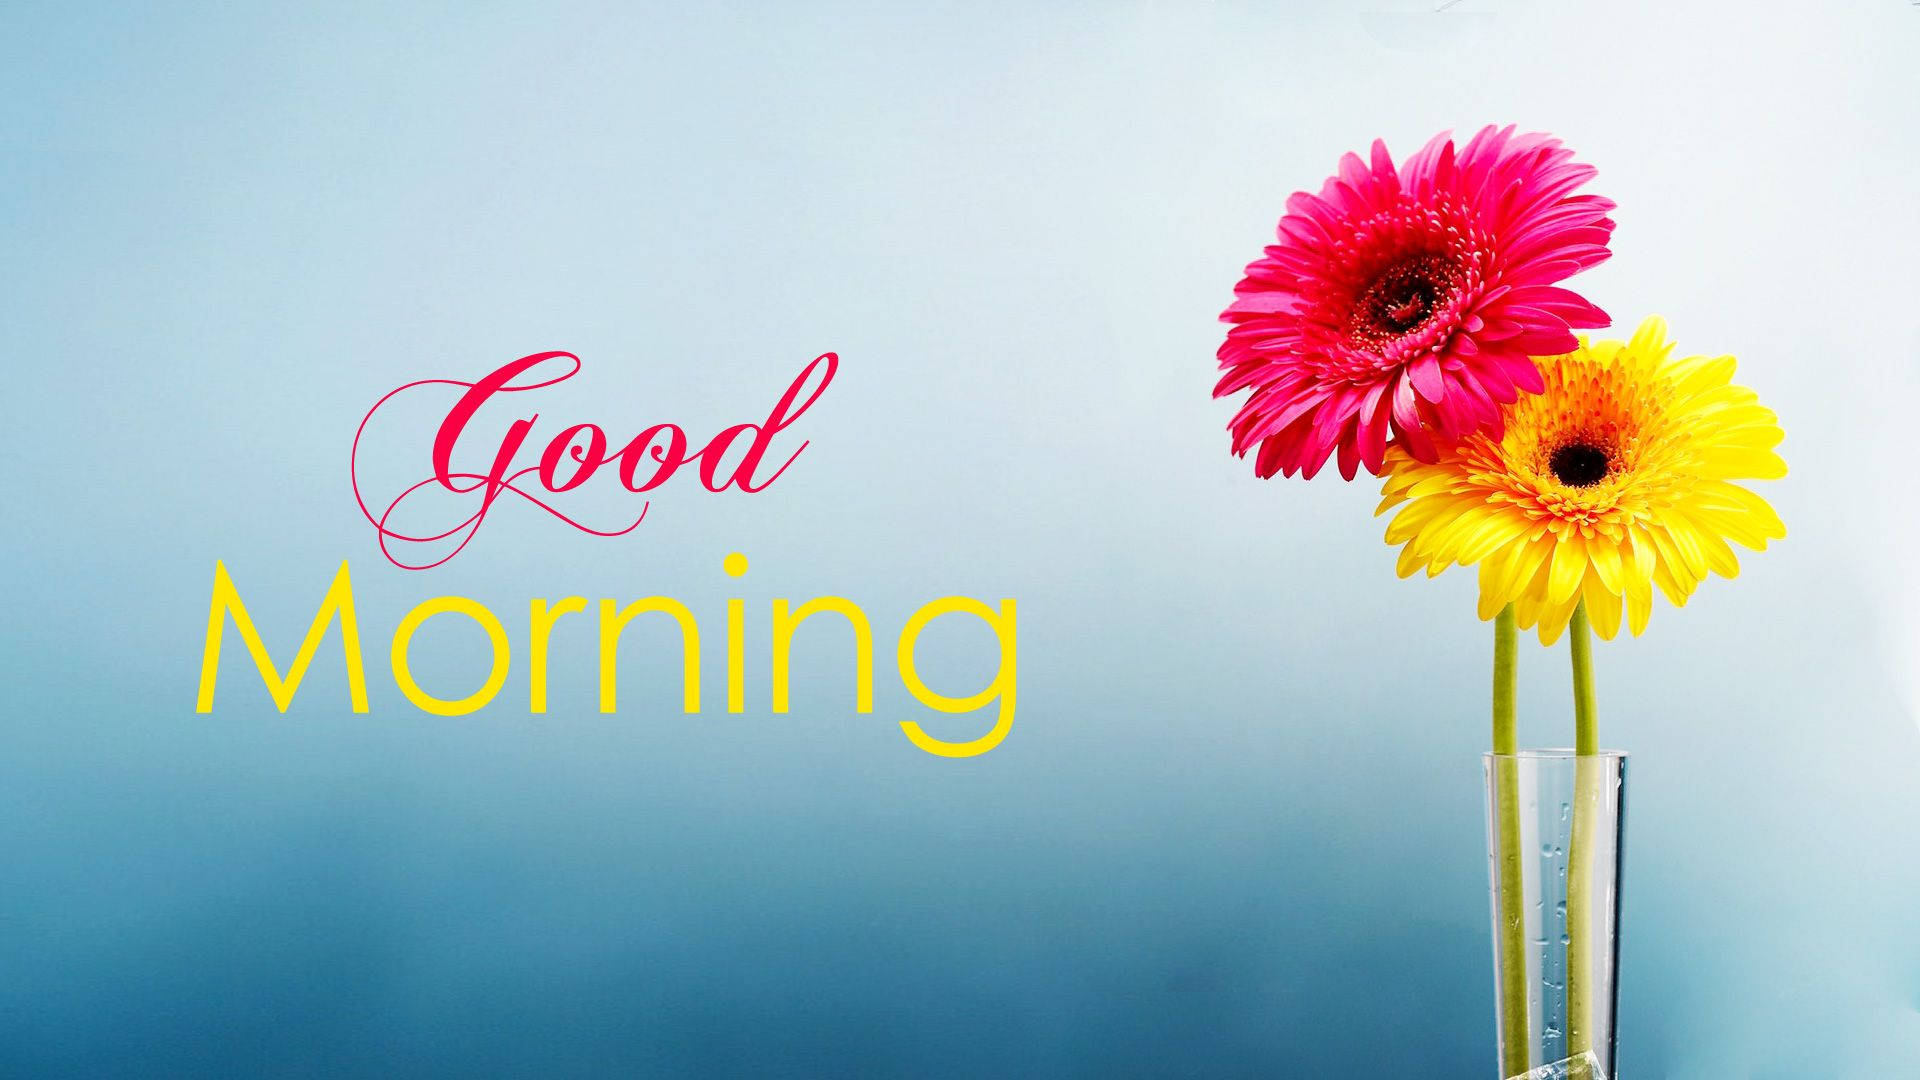 Start your day with a good morning and some encouraging flowers. Wallpaper